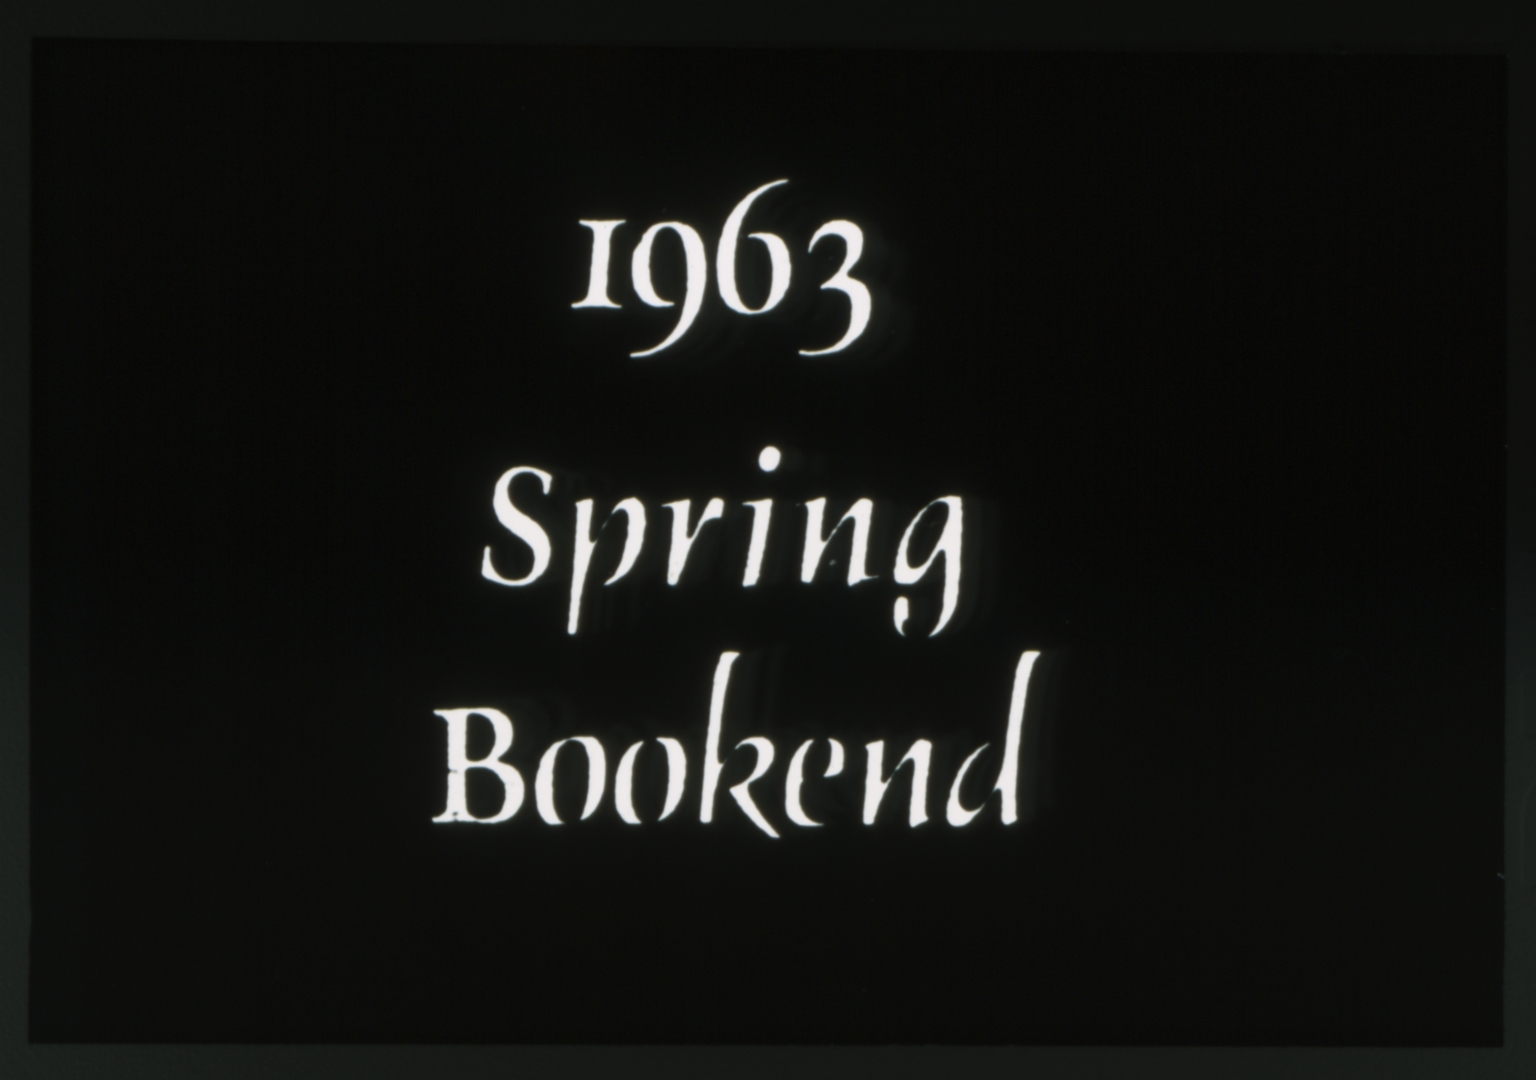 1963 Spring Bookend